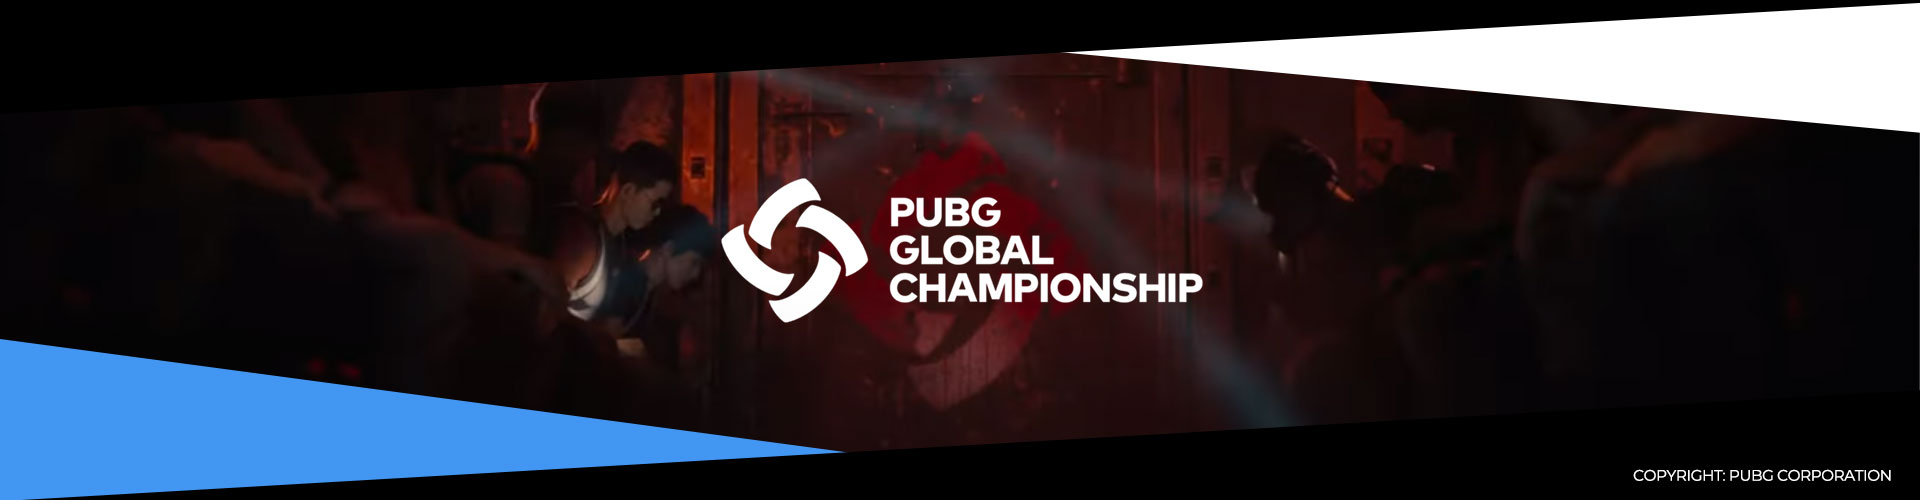 Preview of the 2019 PUBG Global Championship